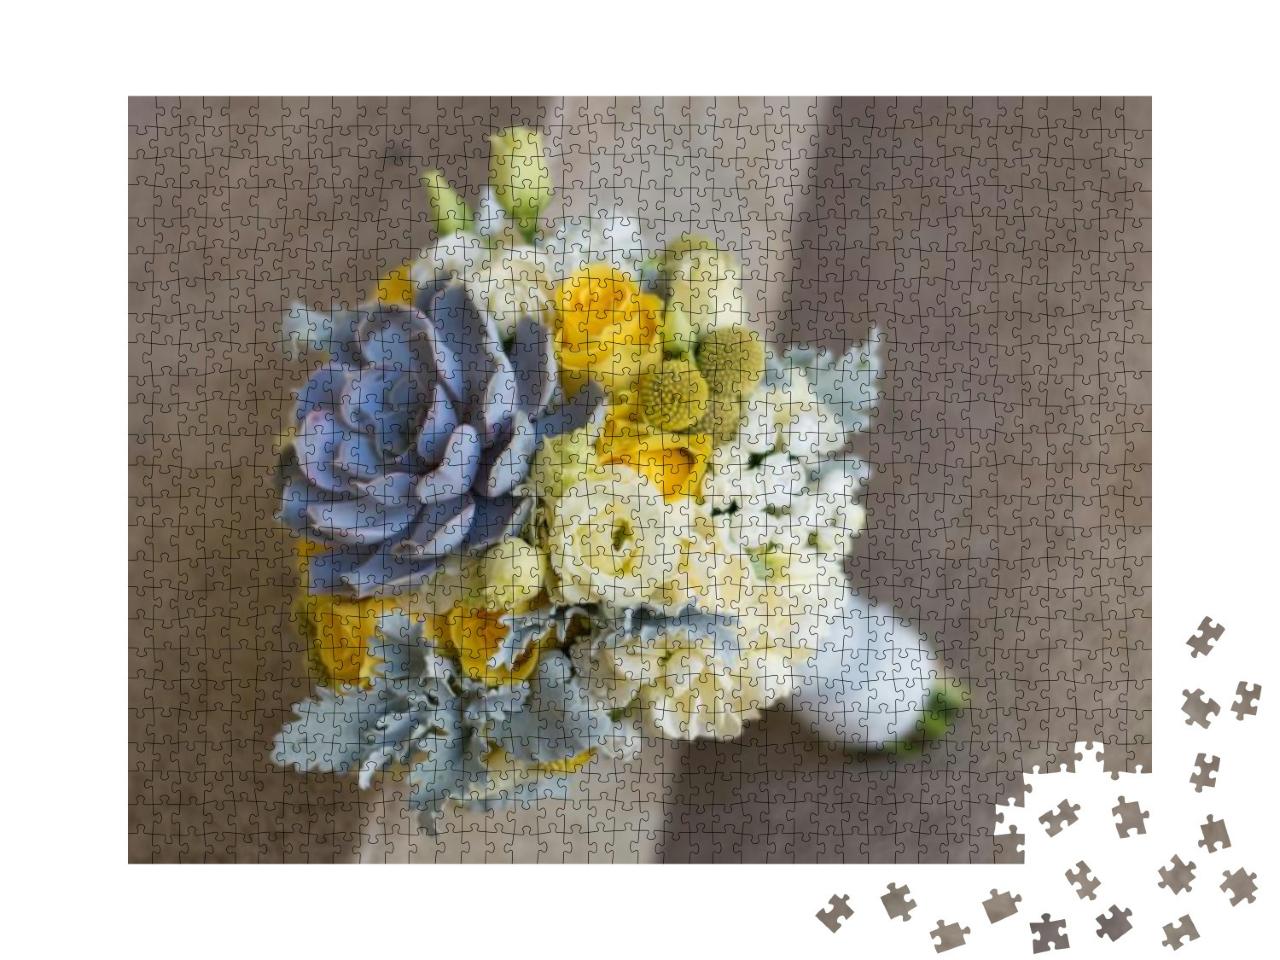 Yellow Wedding Bouquet Details in Yellow Shades & Grays... Jigsaw Puzzle with 1000 pieces